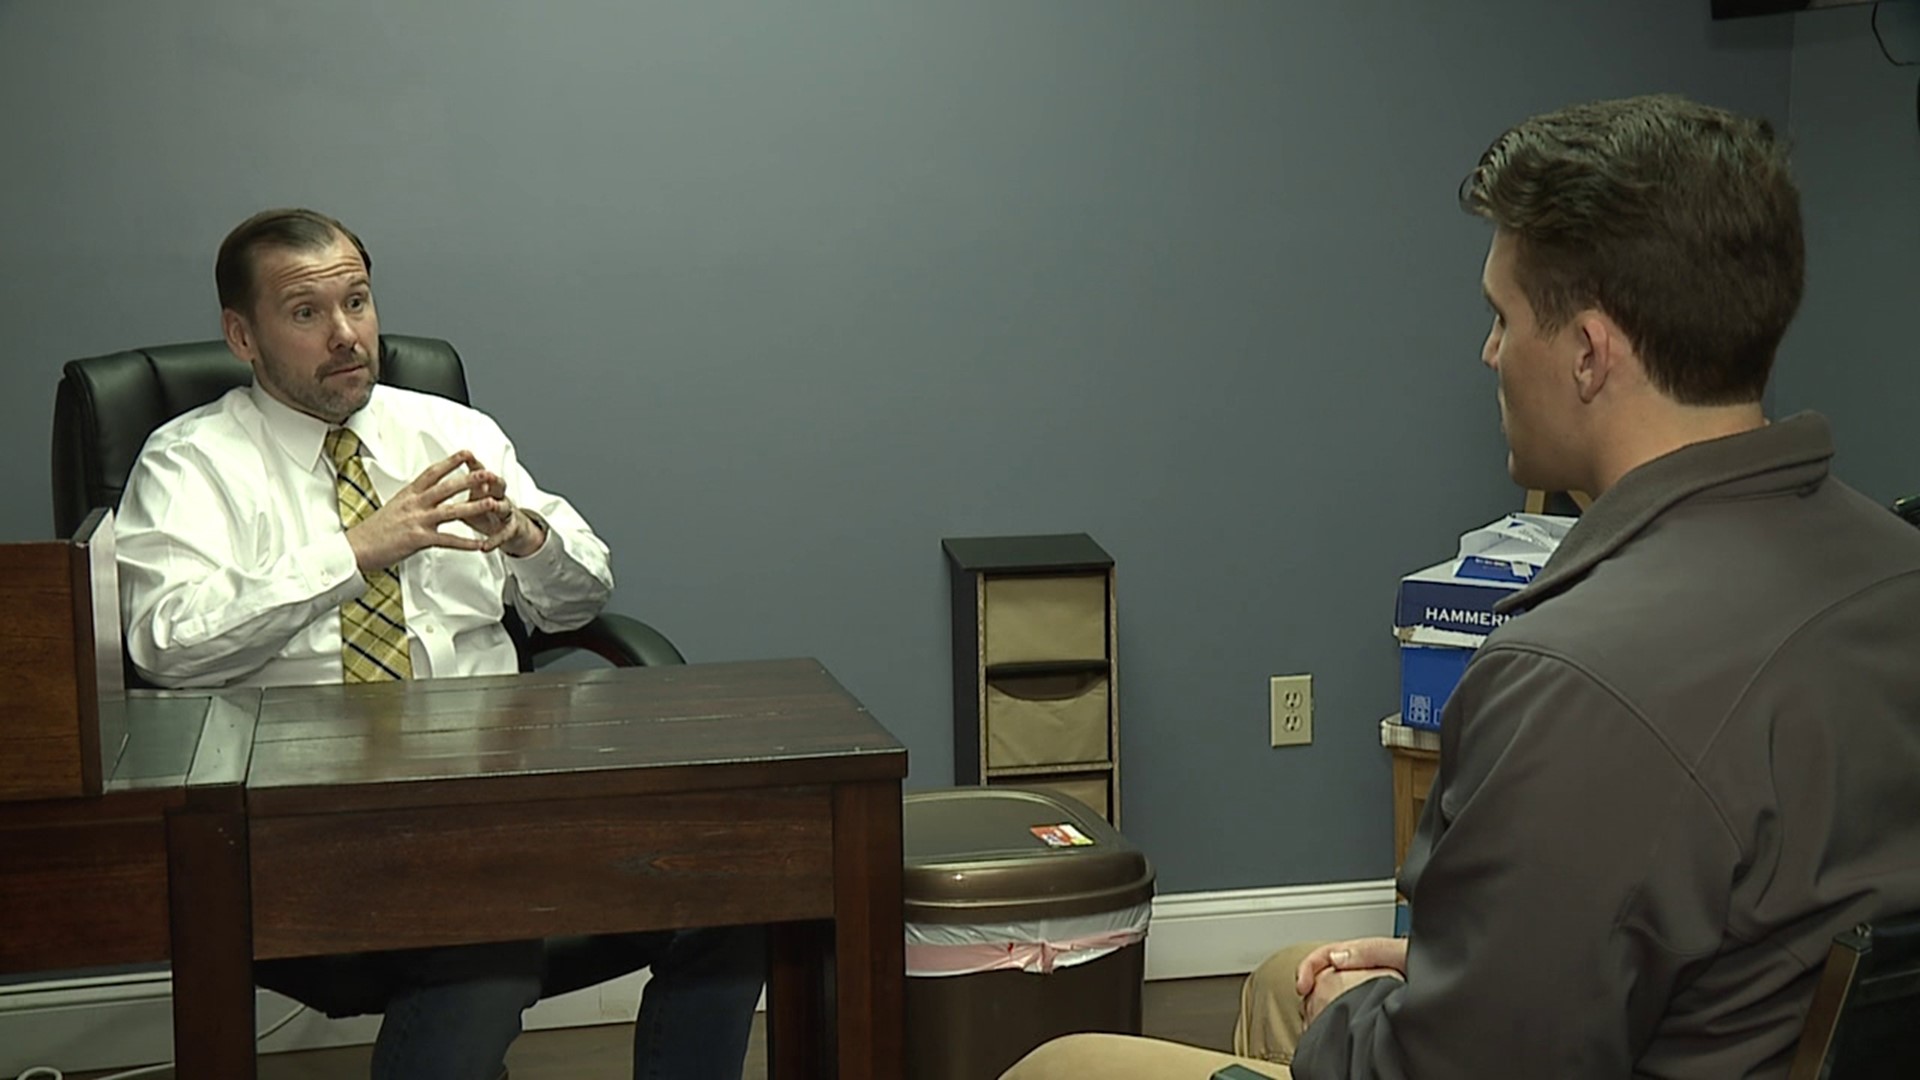 Newswatch 16's Jack Culkin sat down with a defense attorney to determine what homeowners in Pennsylvania can and cannot do under the Castle Doctrine.